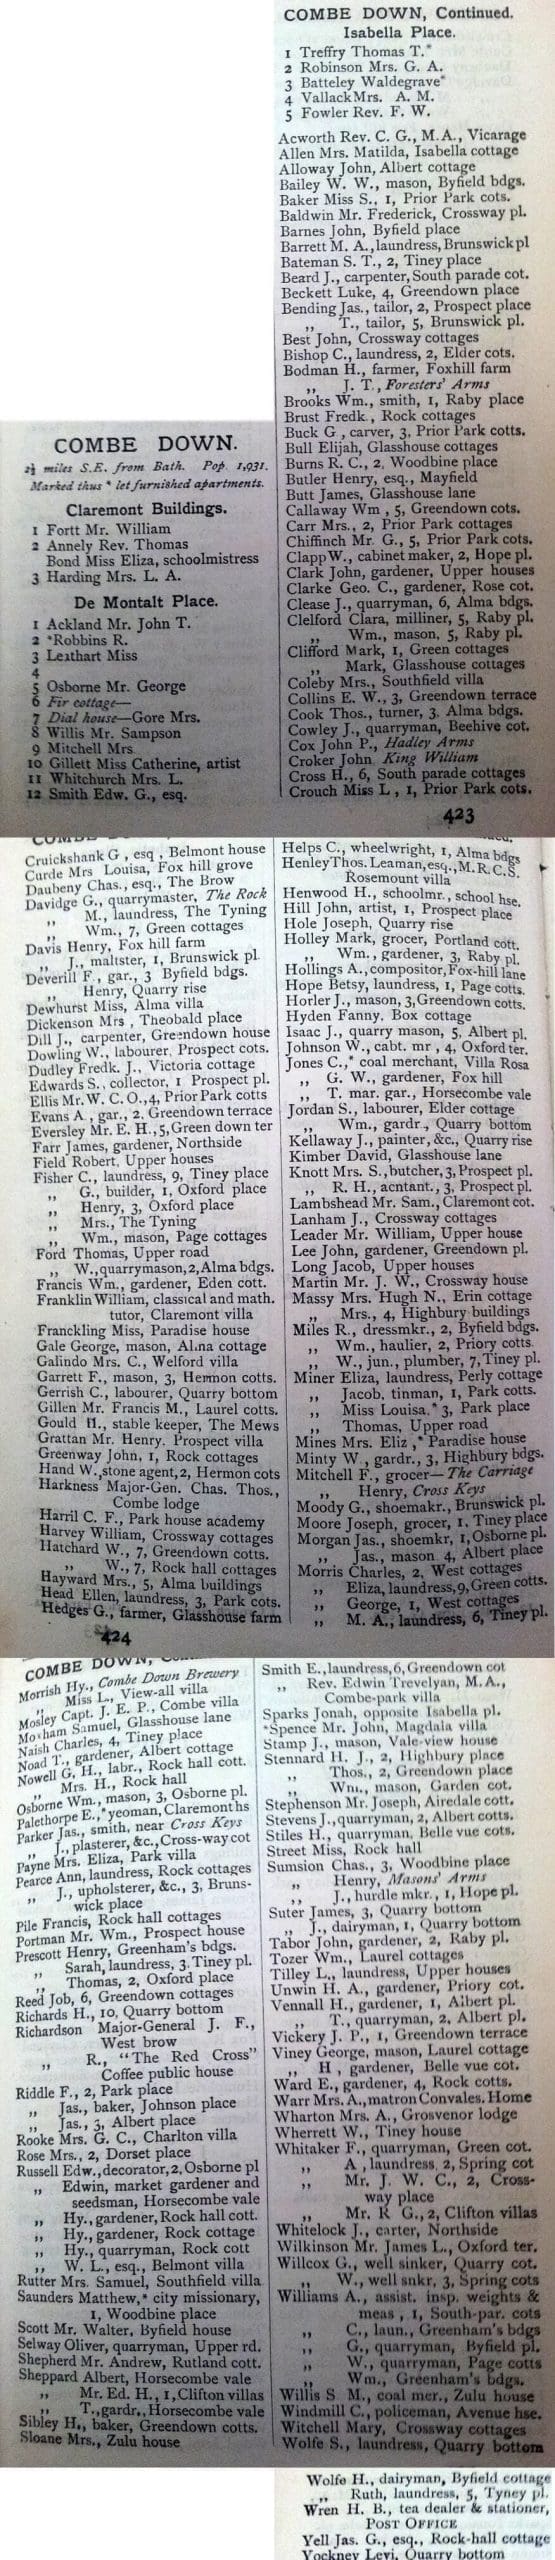 1880 Post Office Directory for Combe Down